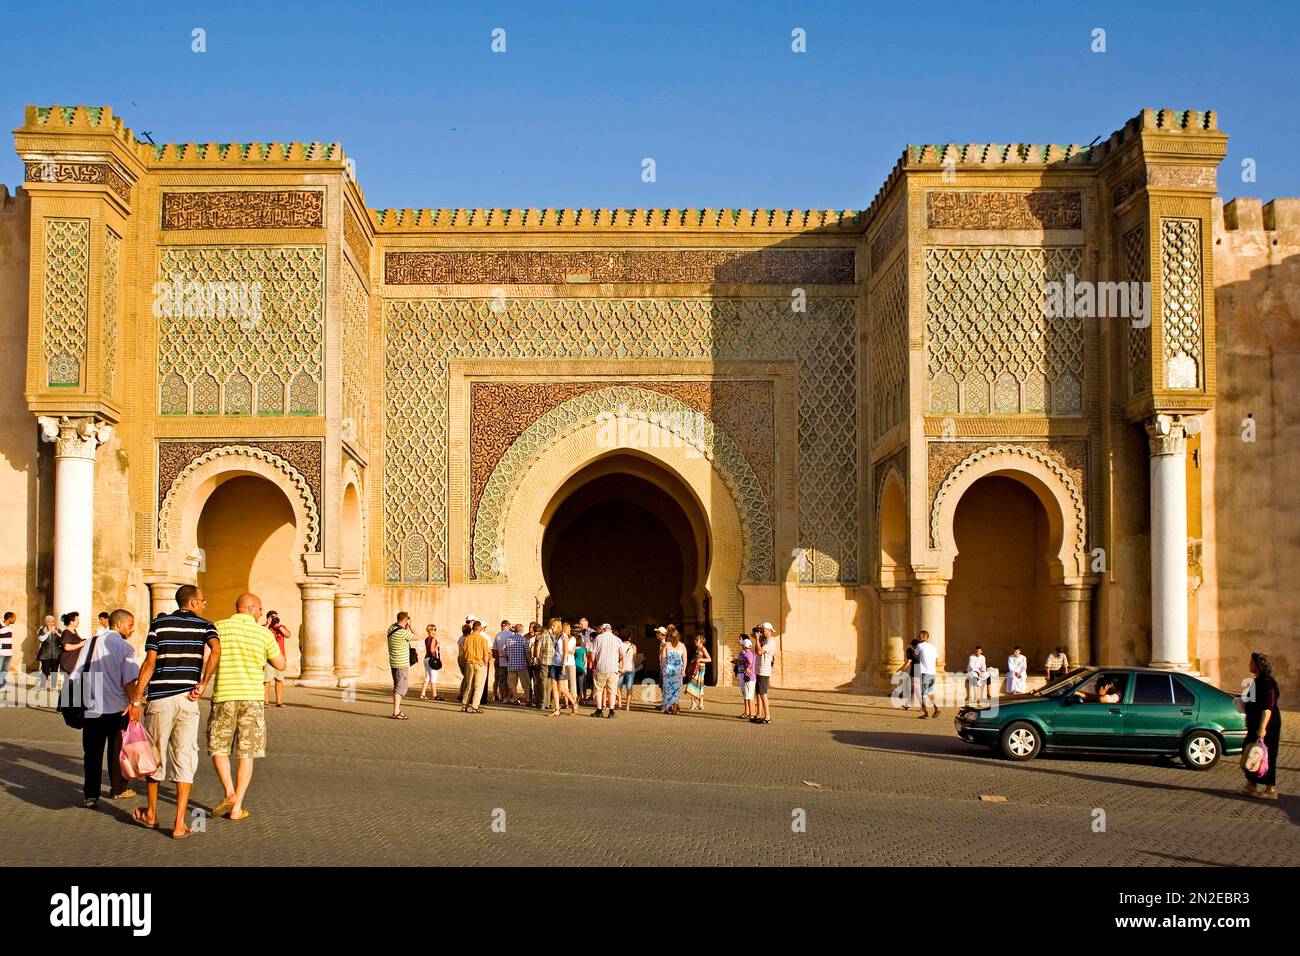 Bab el-Mansour, undoubtedly the most beautiful gate of MeknesGate, Meknes, Morocco Stock Photo